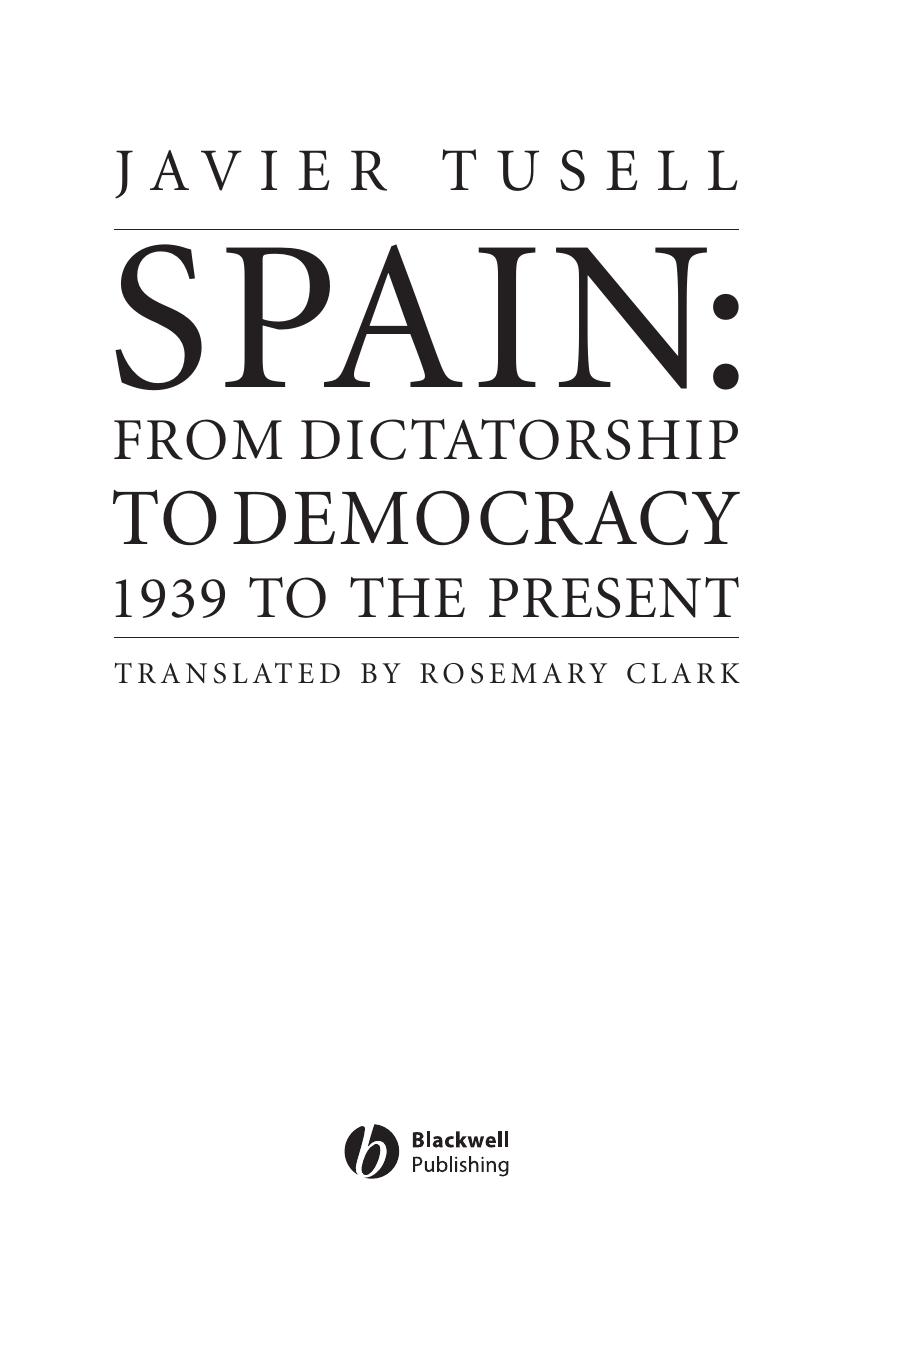 Spain From Dictatorship to Democracy, 1939 to the Present (Javier Tusell) (z-lib.org)